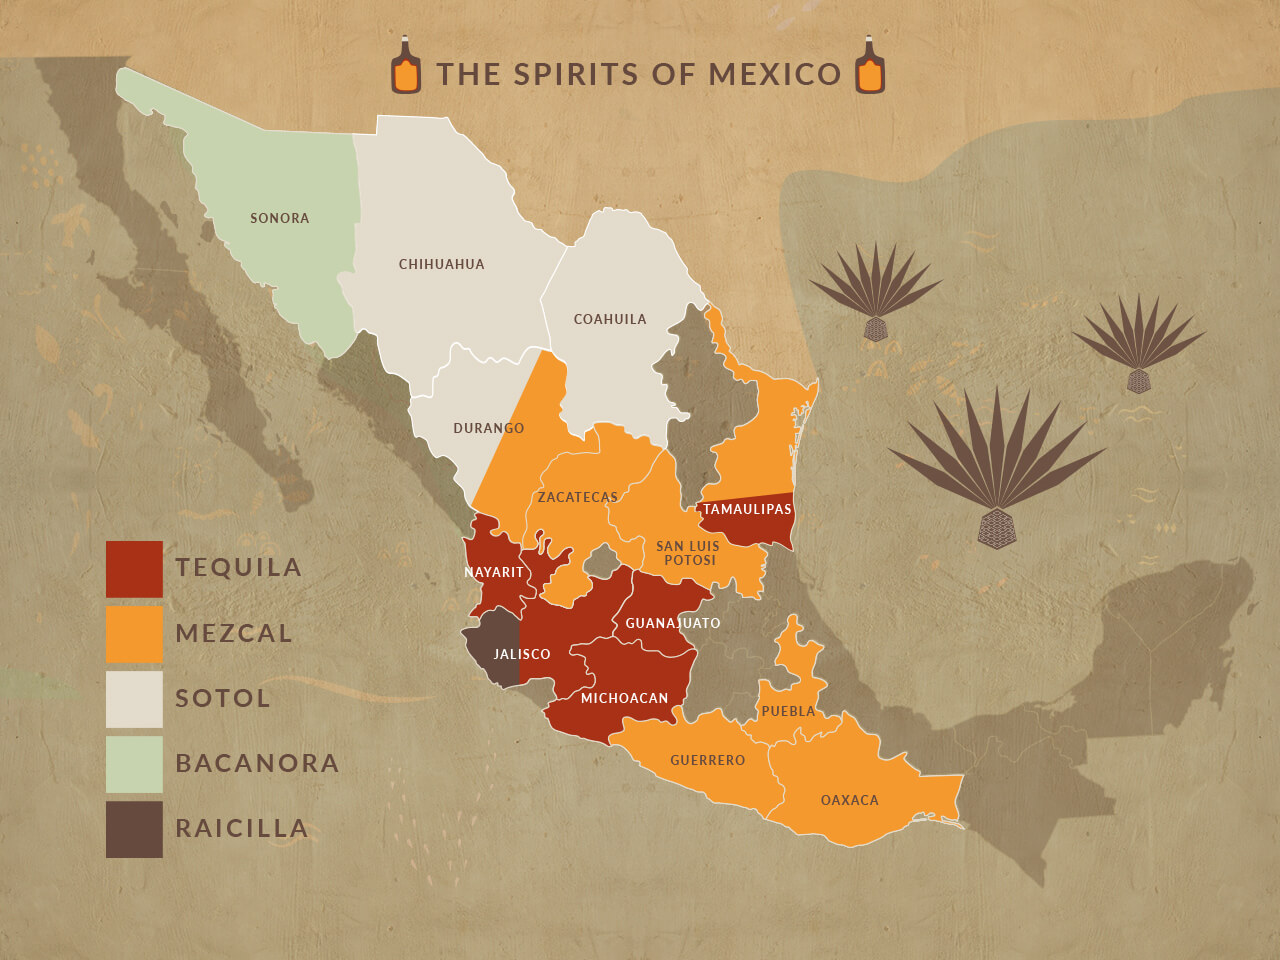 Tequila and Mezcal